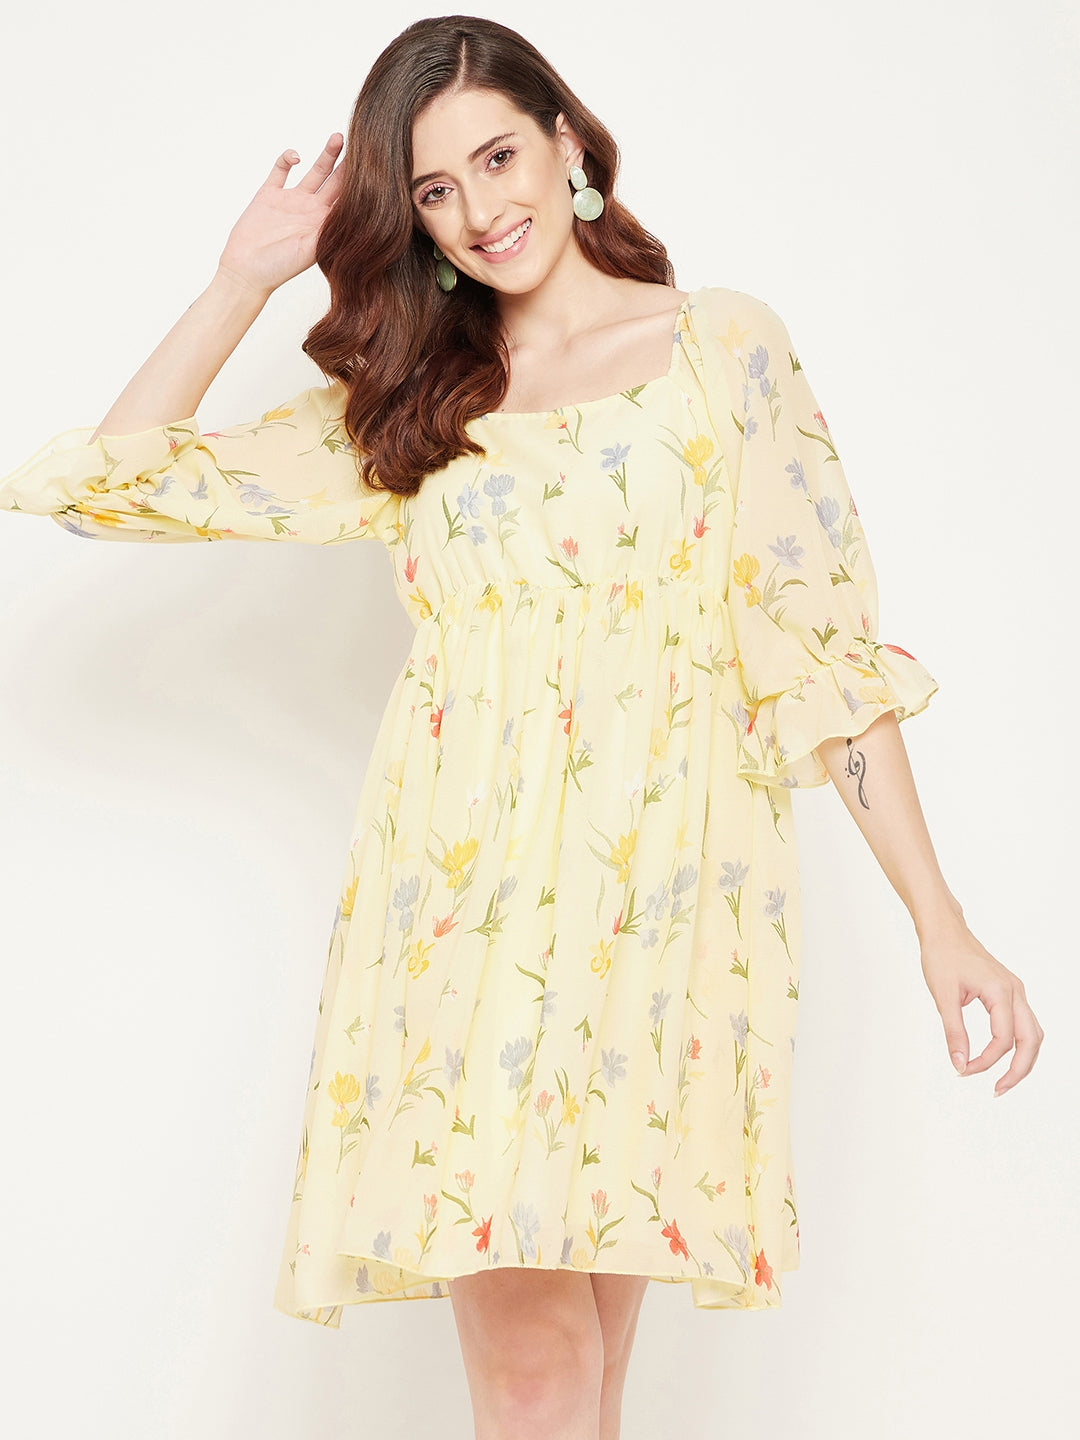 Trinity Long Sleeve Backless Floral Dress – ASTR The Label